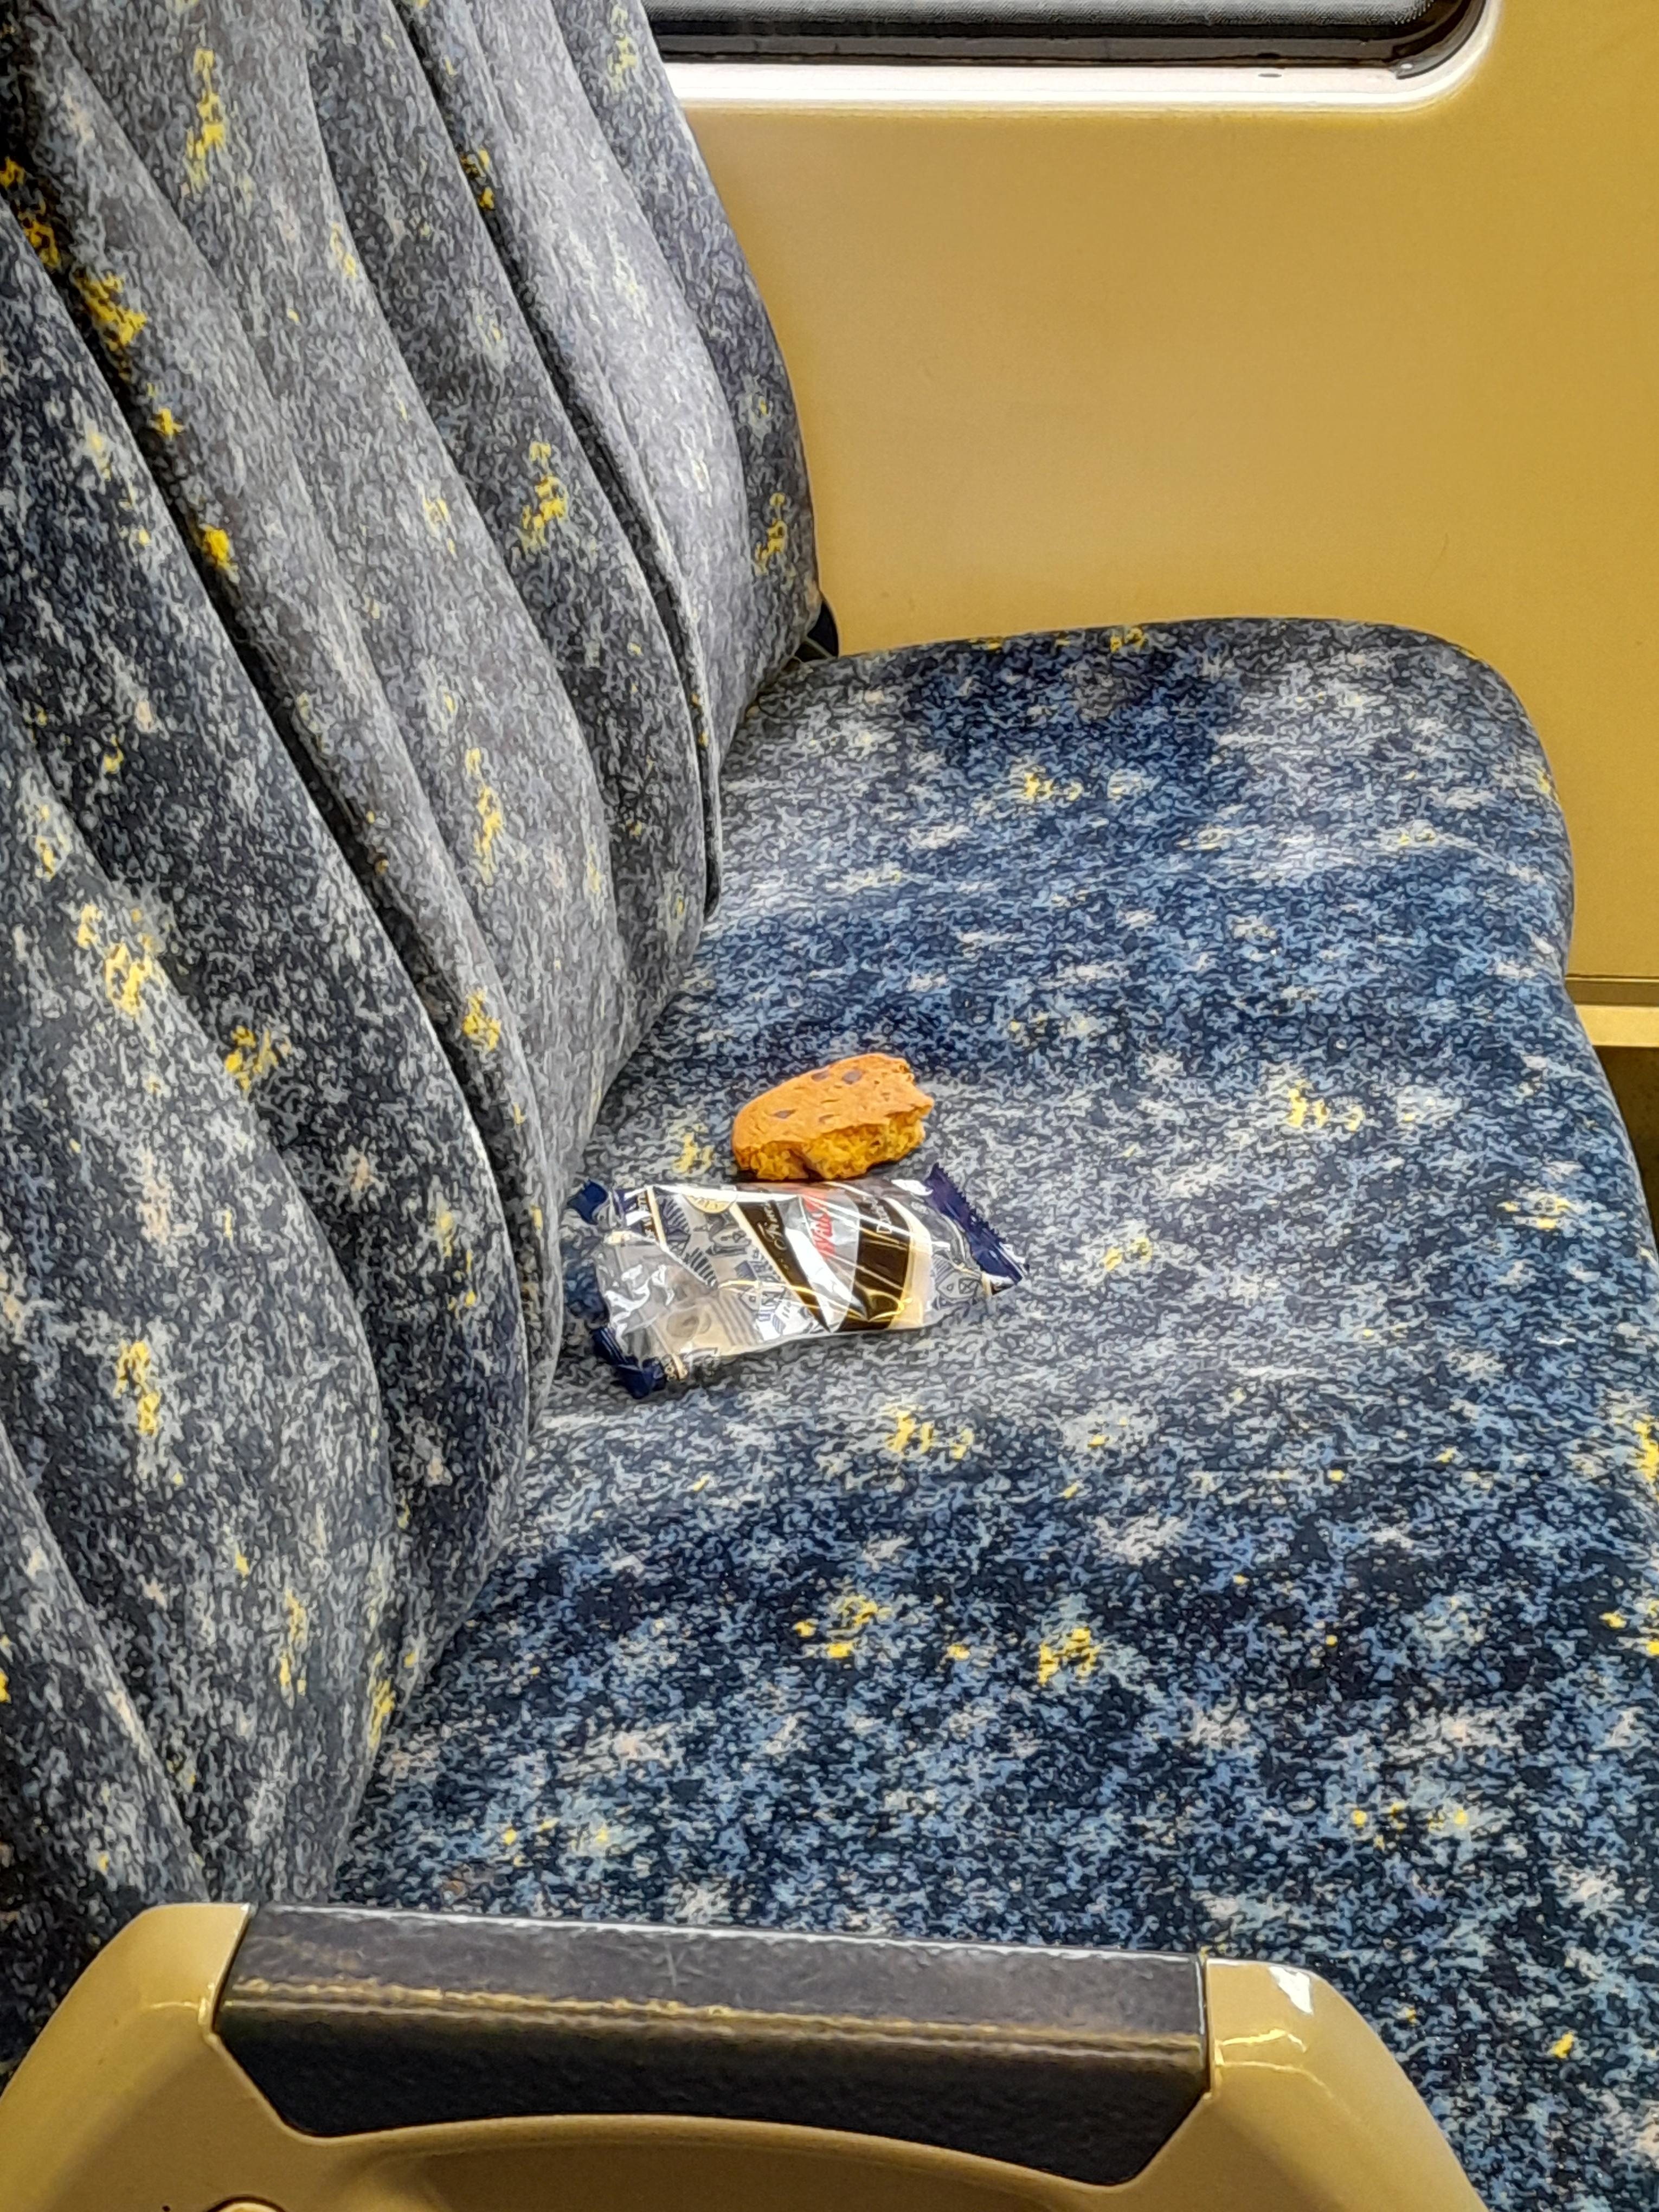 Food on a bus seat